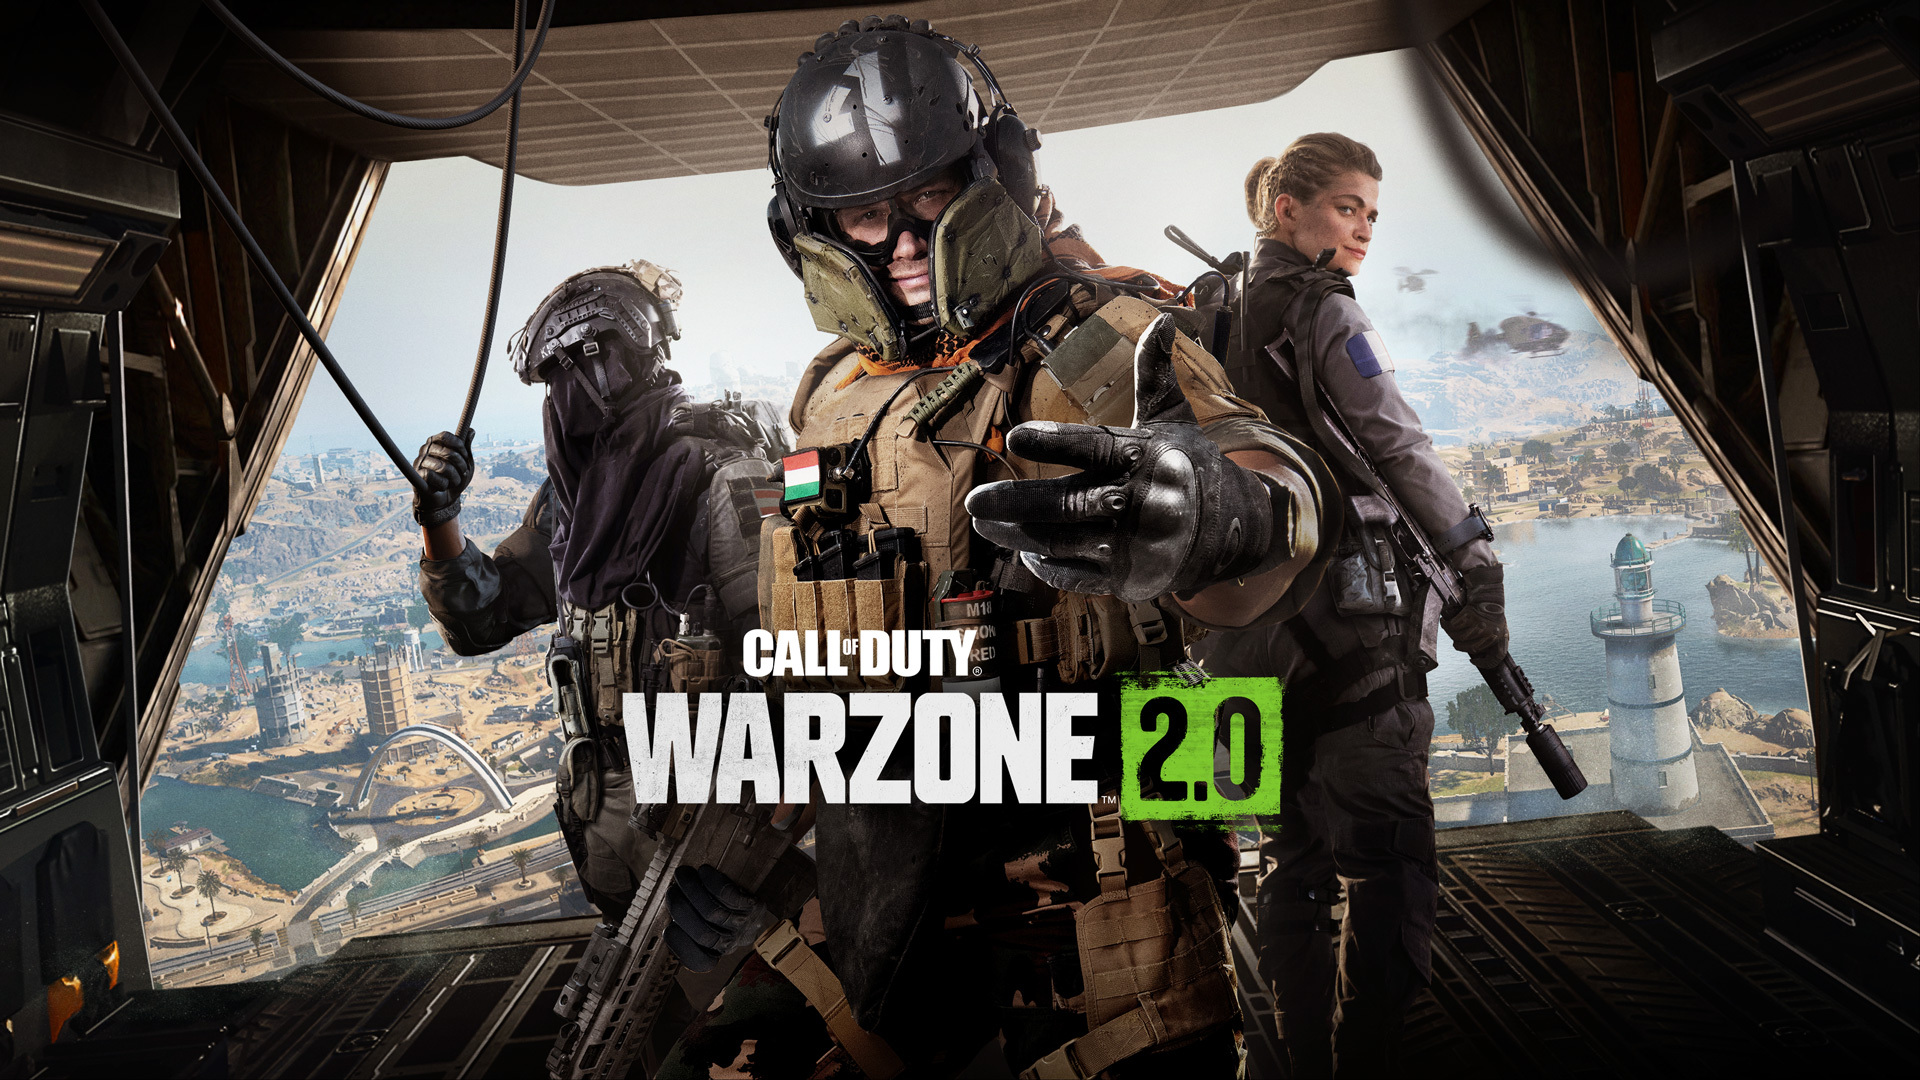 Activision announces more information about season 2 of Warzone 2.0